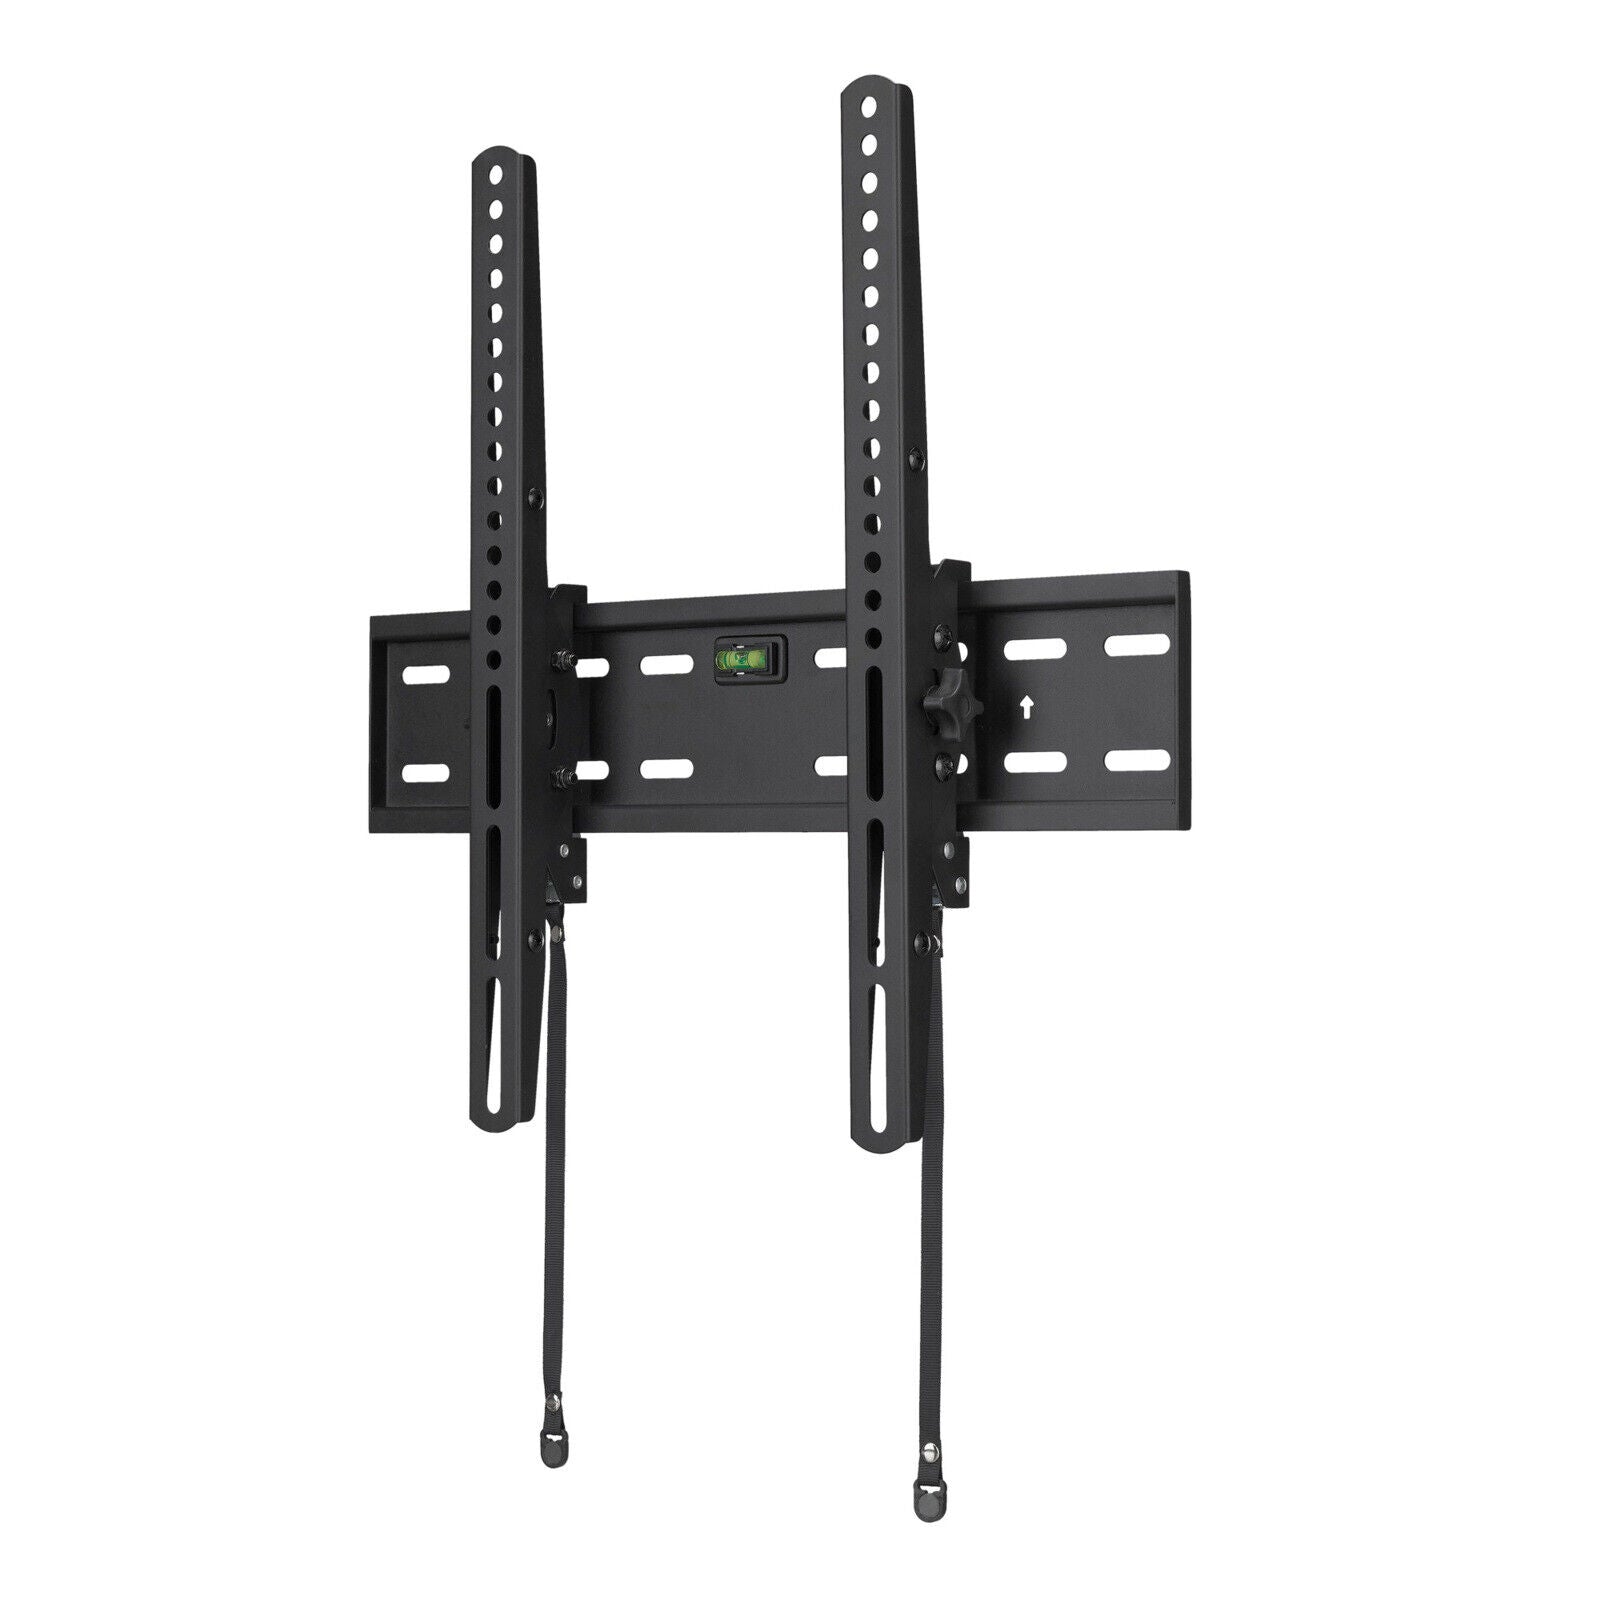 Onn Tilting TV Wall Mount for 19"-50" TVs - Up to 88 lbs - Up To 12� Tilting